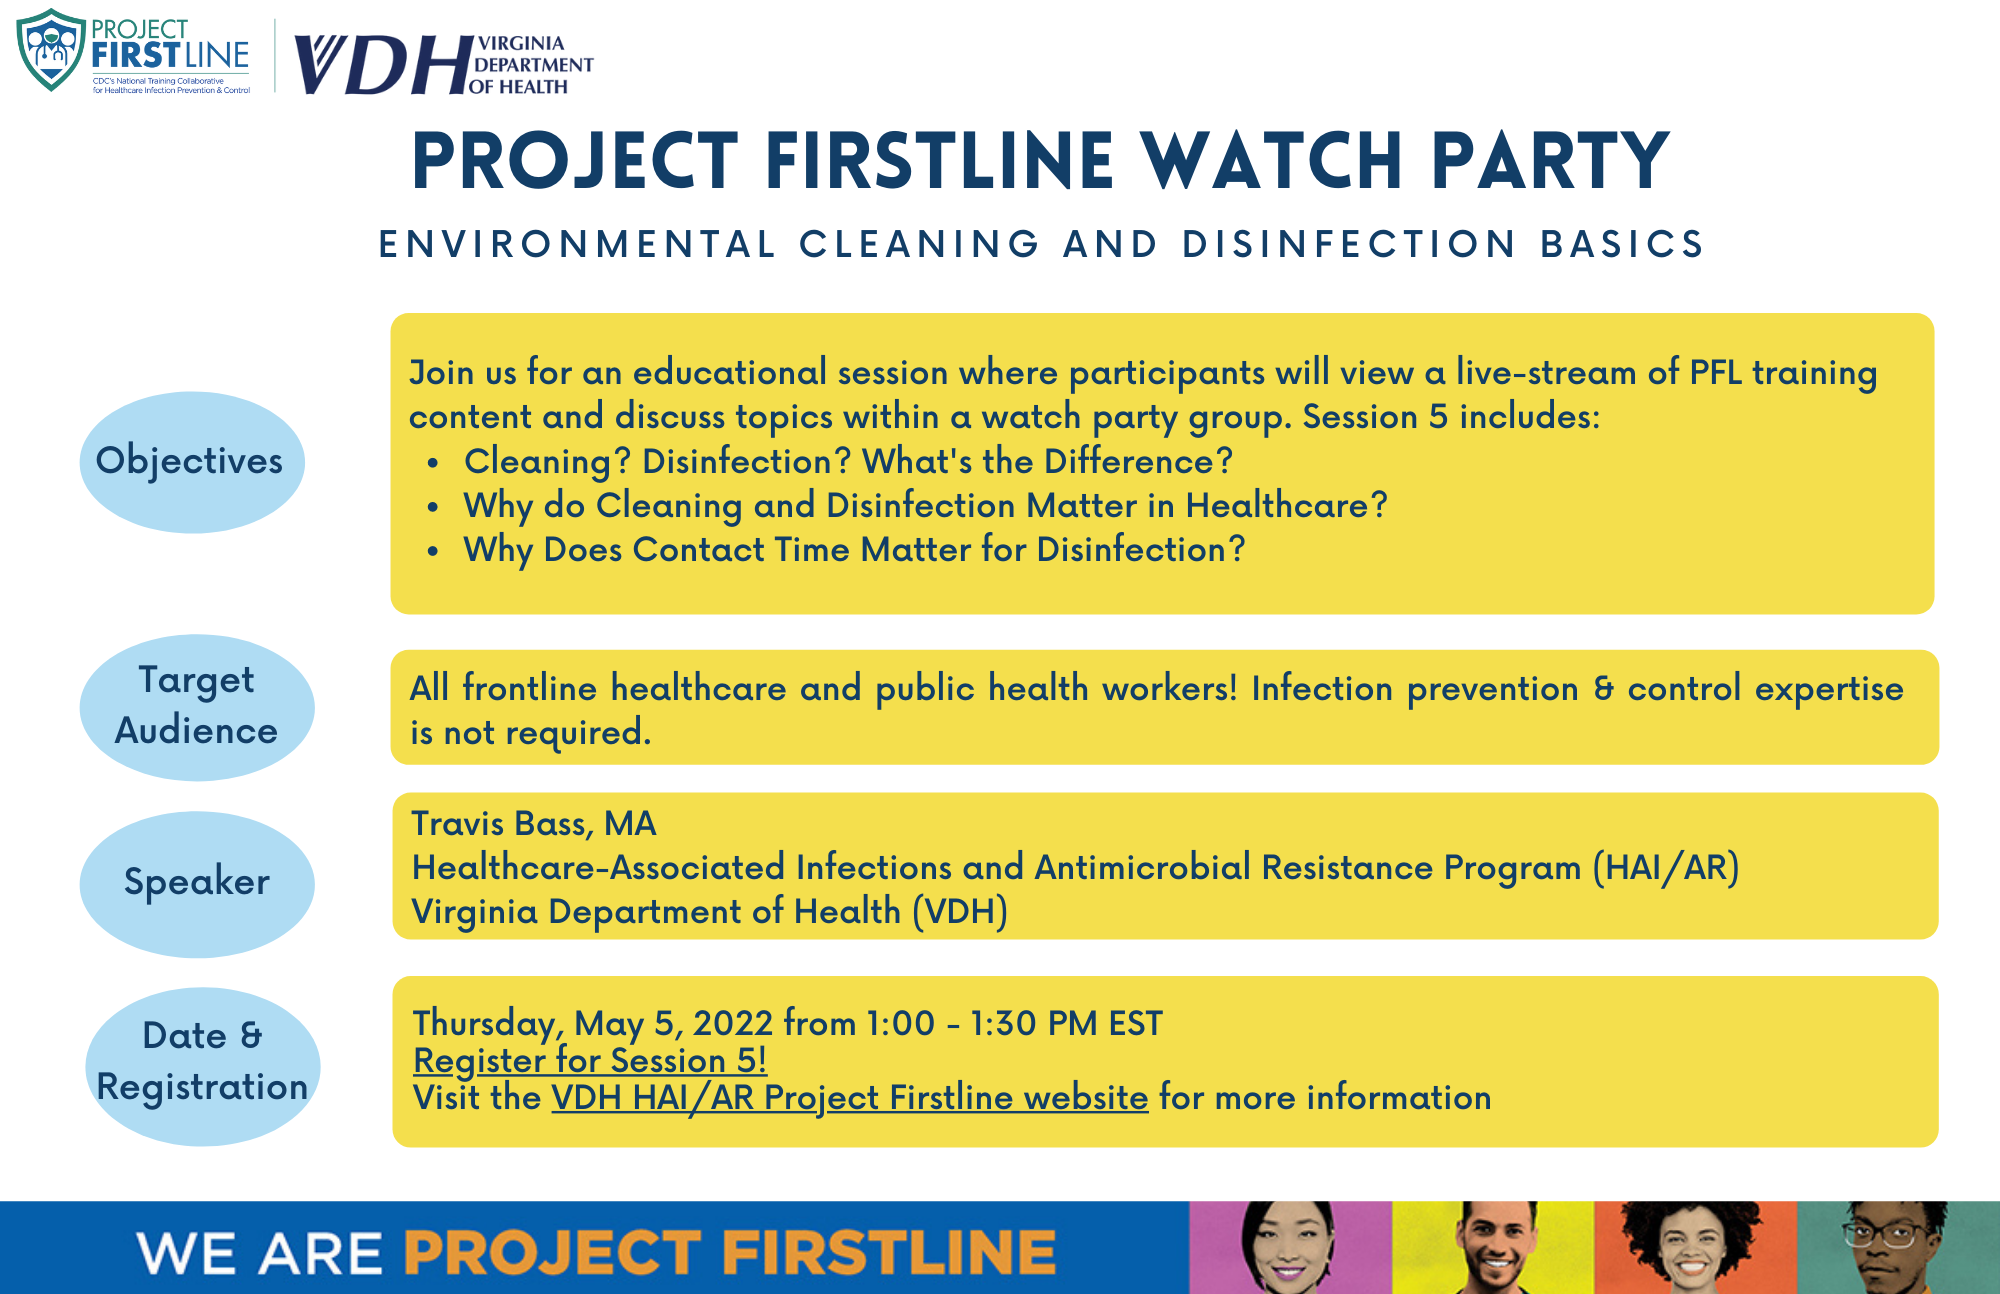 Project Firstline Watch Party Session 5